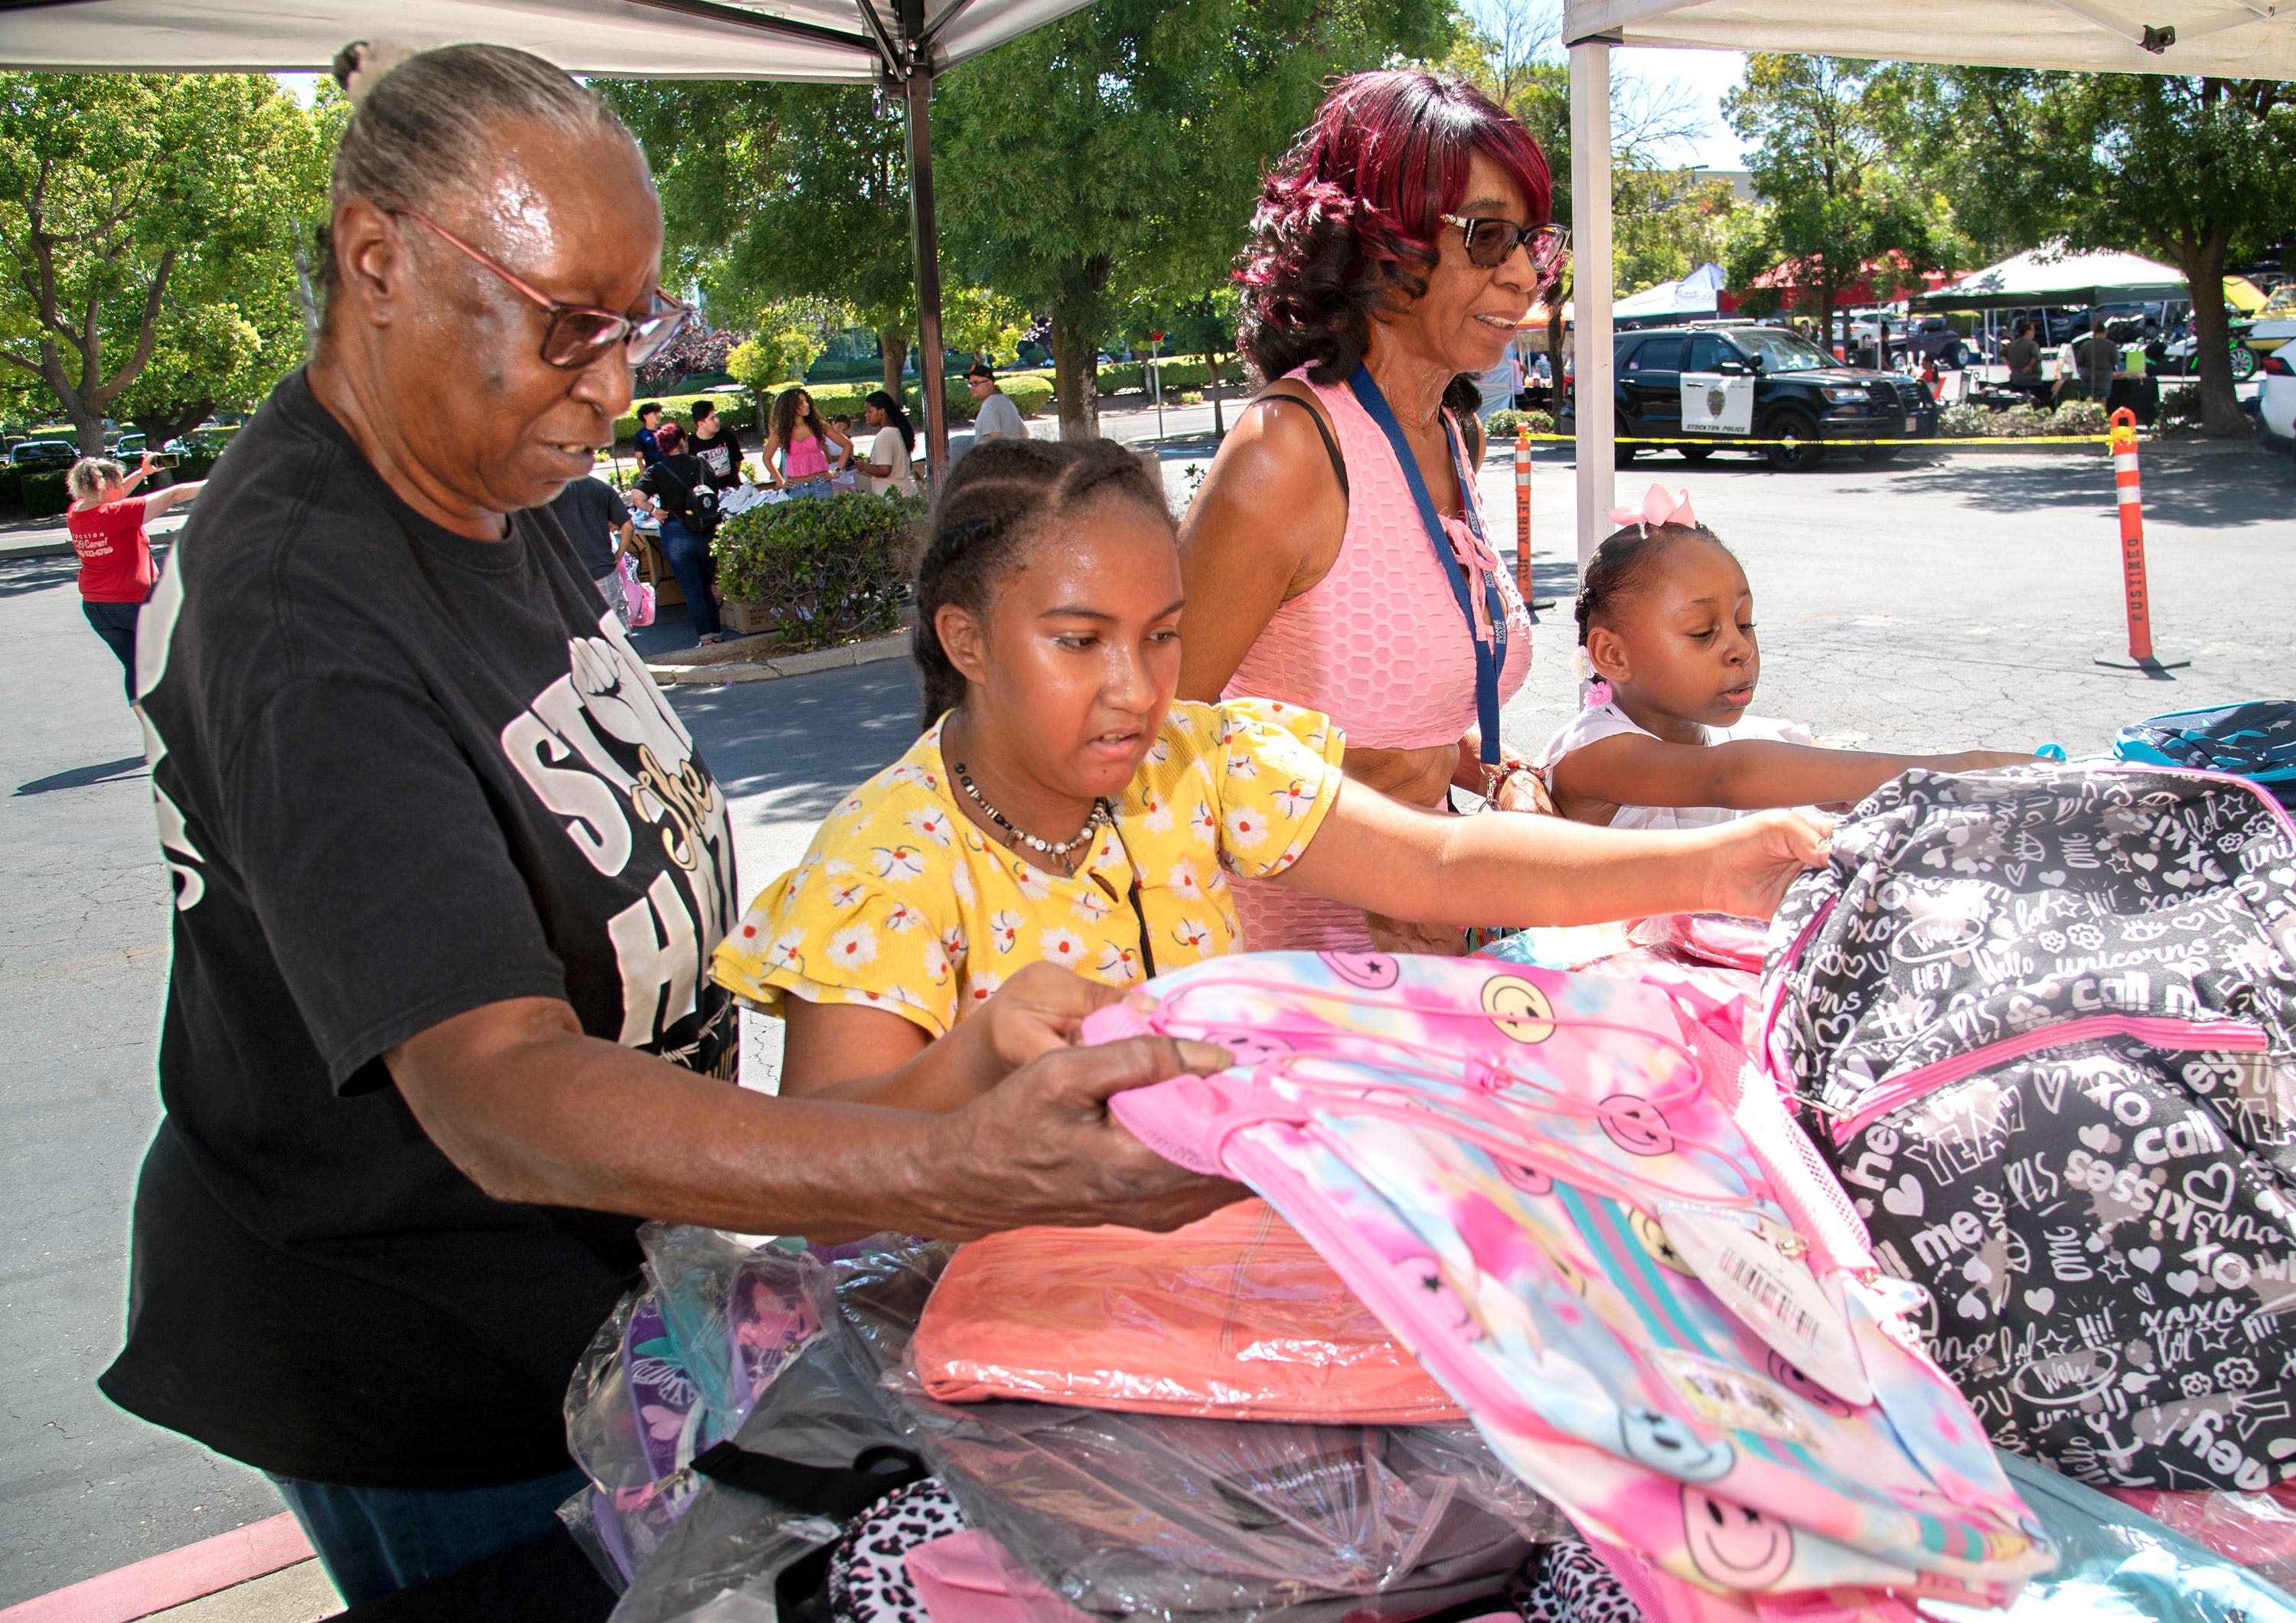 Need free backpacks and supplies before school starts? Here's where to go in Stockton